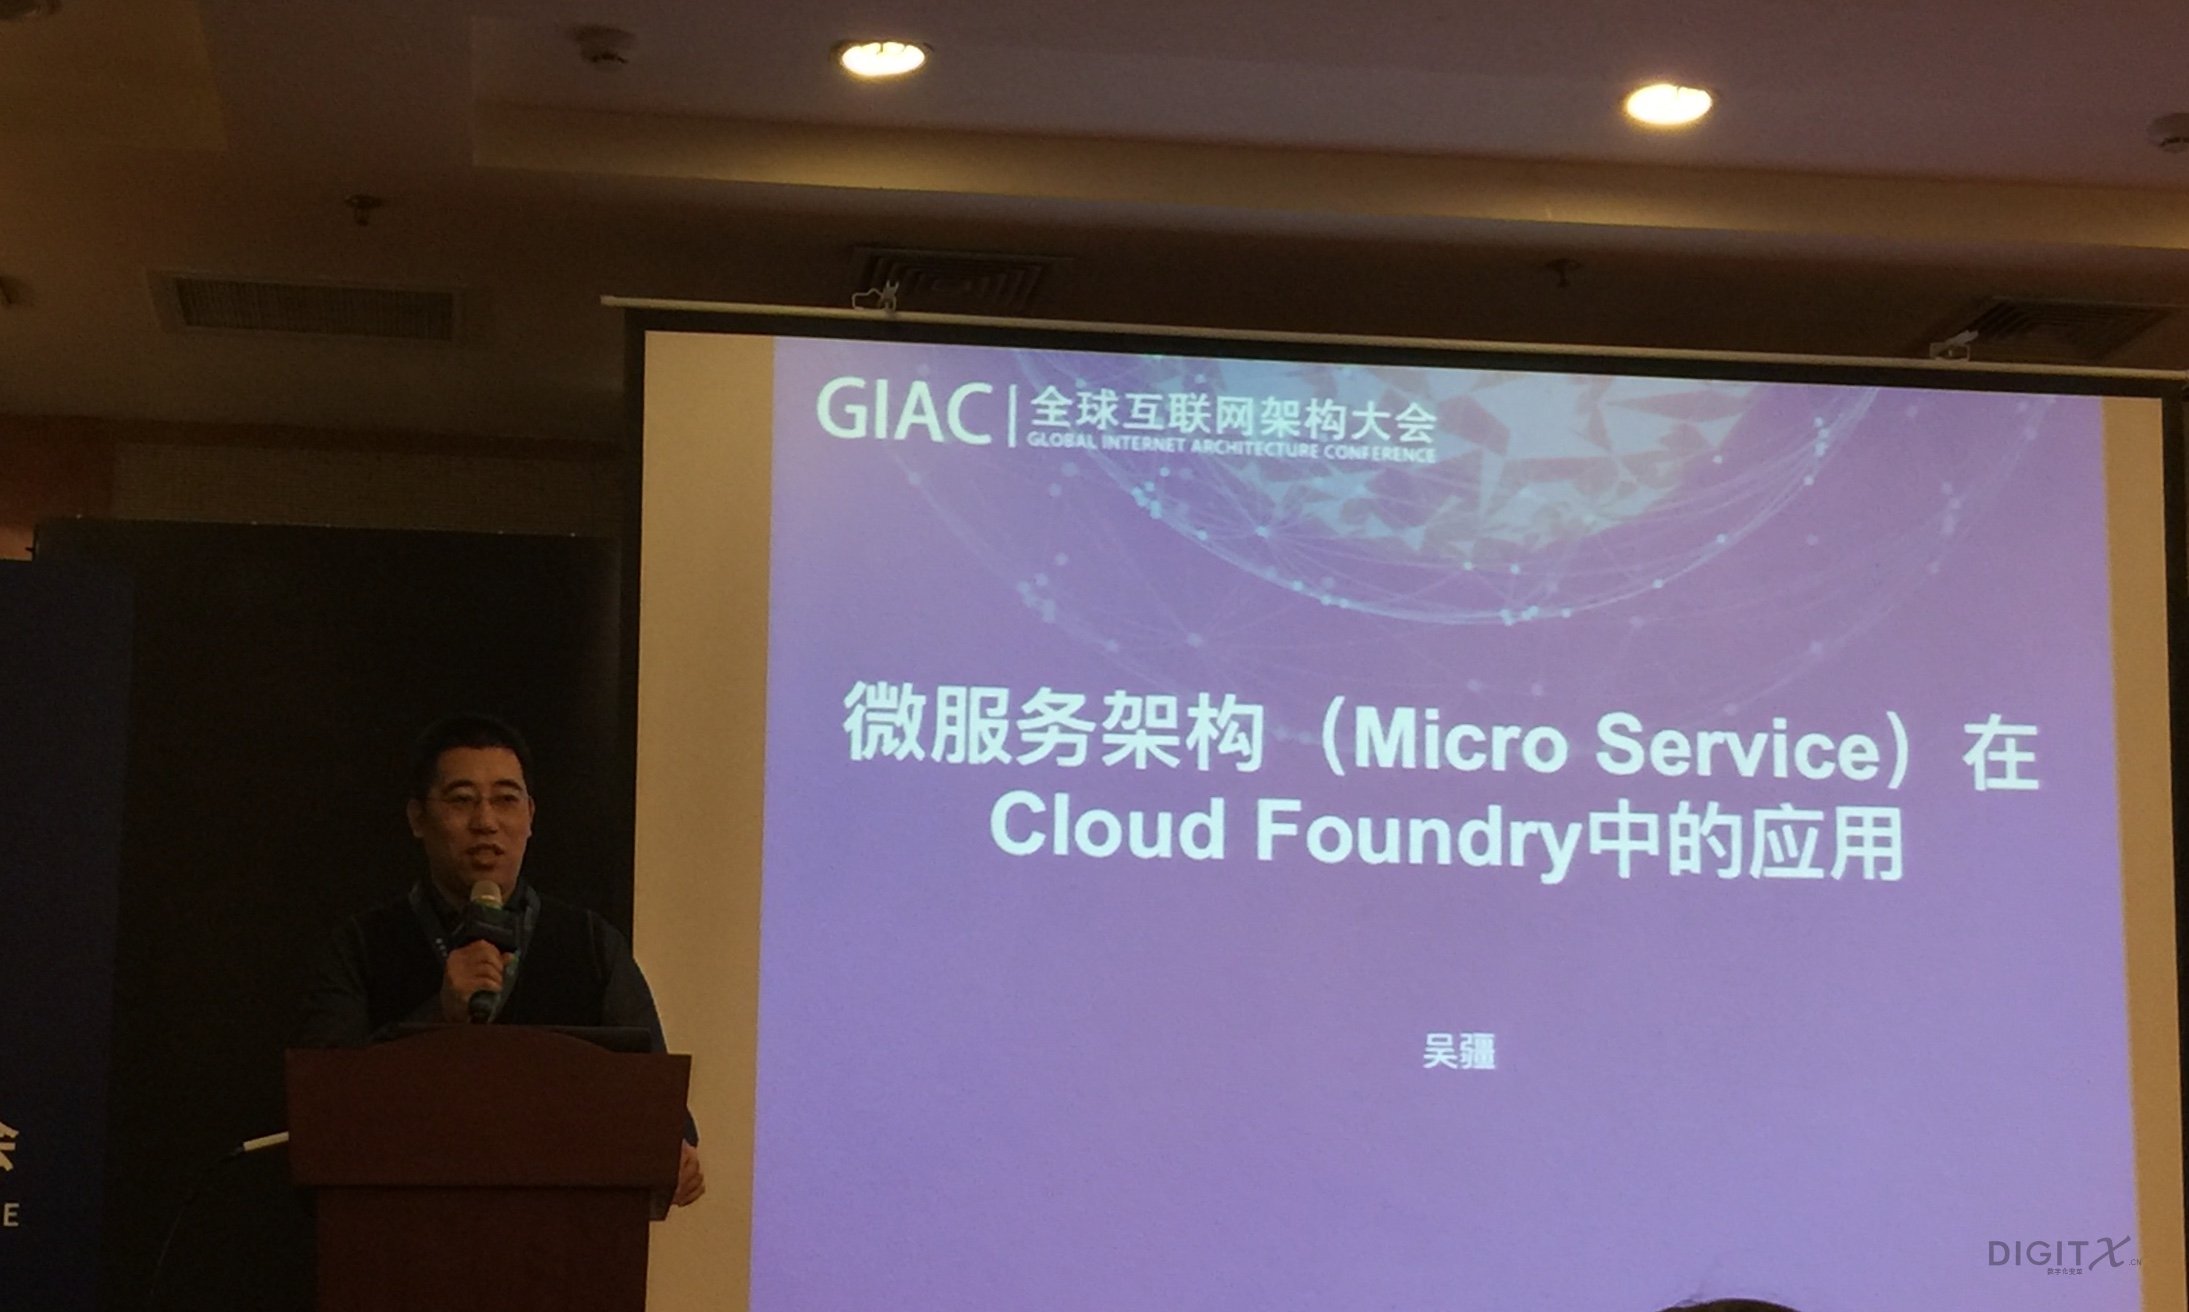 Jack Wu talks about Micro-service in Cloud Foundry